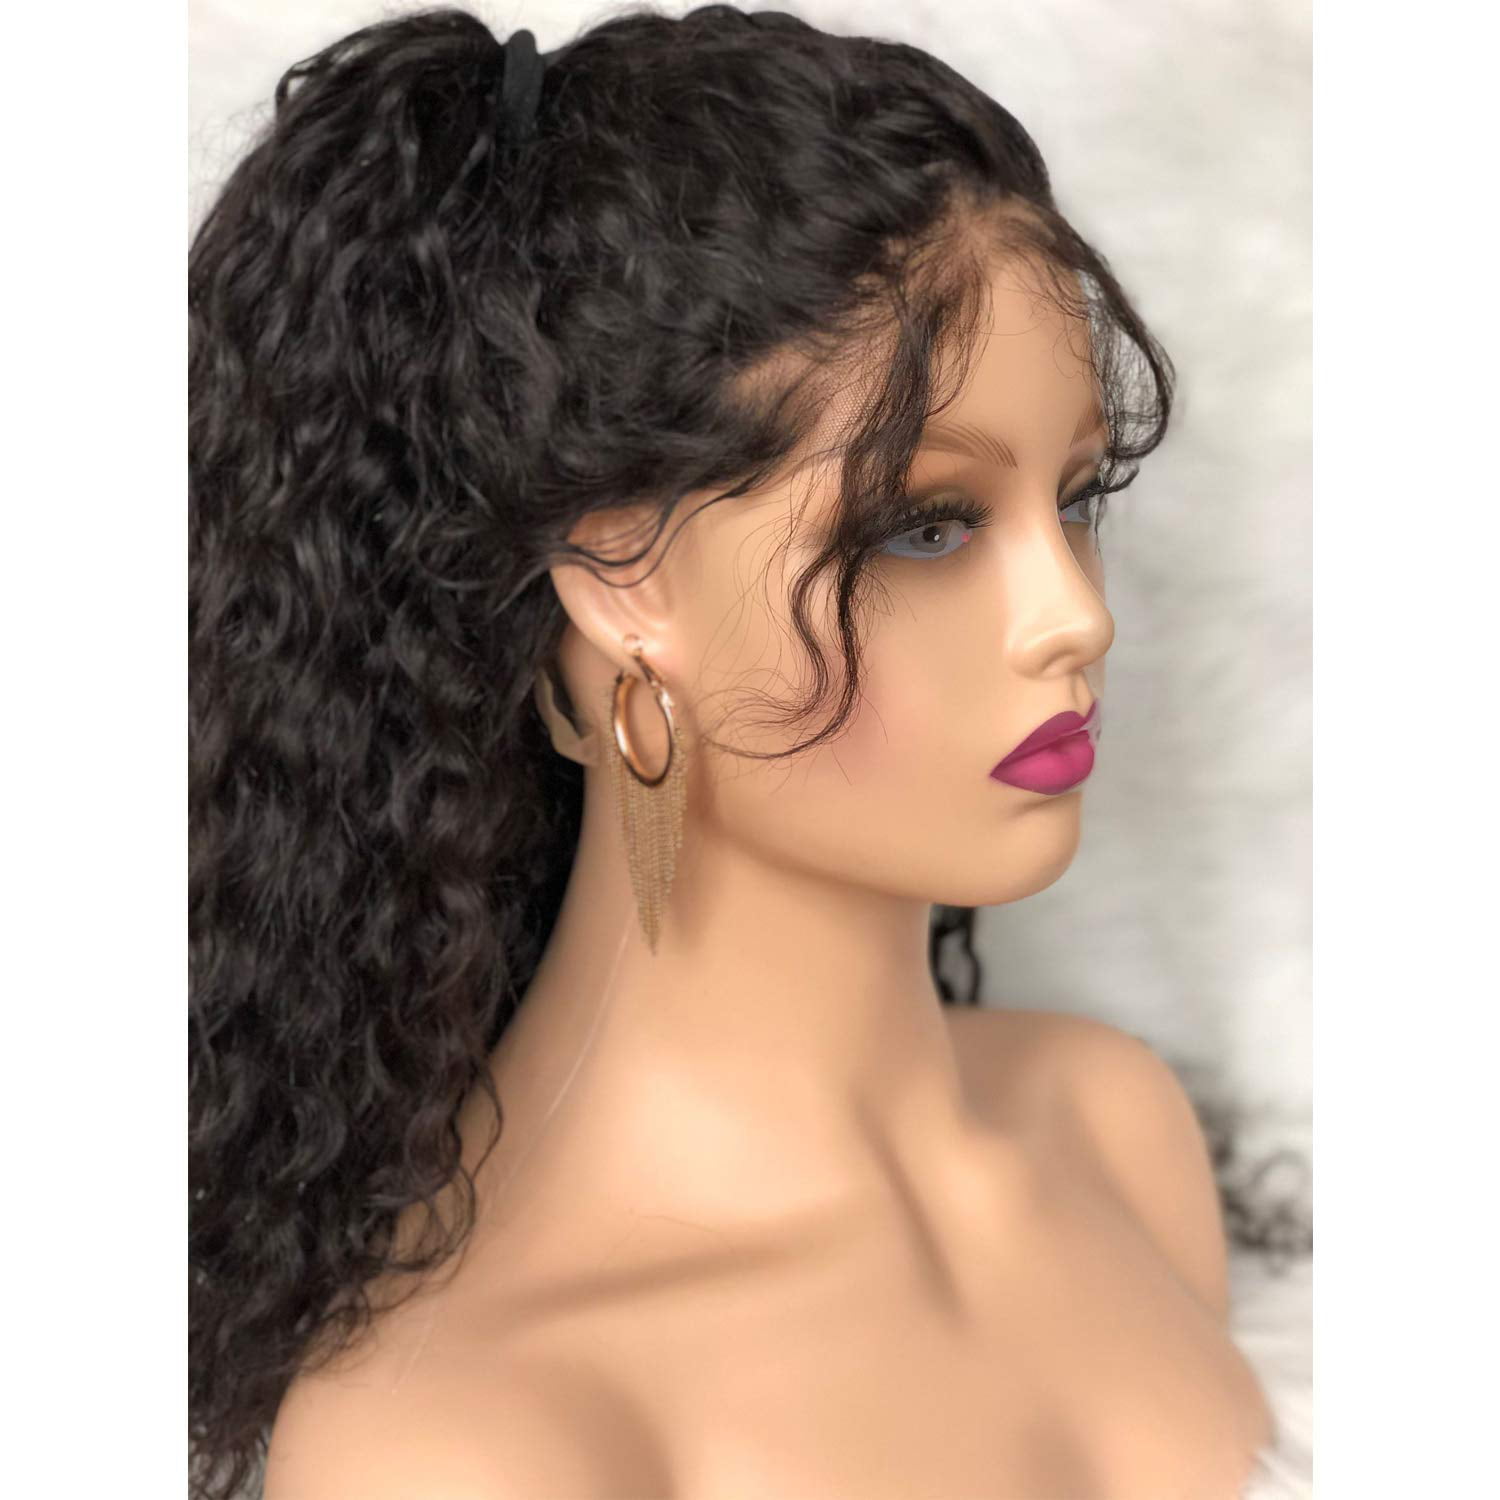 Realistic Female Mannequin Head with Shoulders for Display Hair  Wigs,Hats,Glasses,Headphones,Earrings,Necklace,Jewelry,Durable PVC Women  Manikin Wig Head Stand …